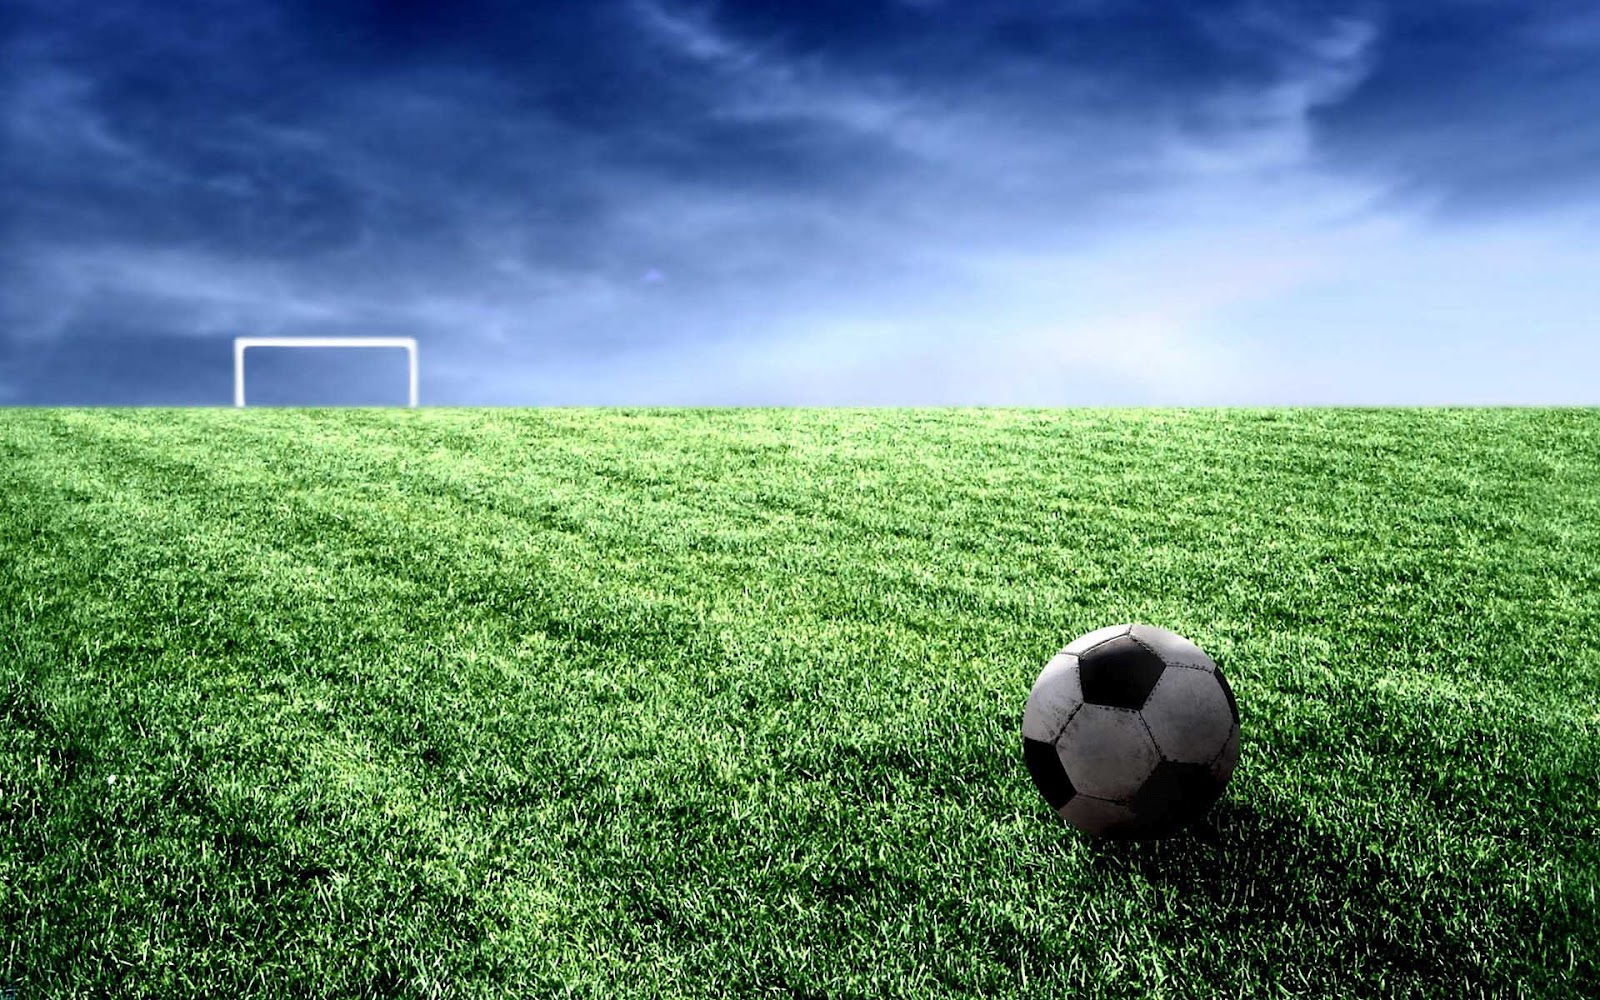 Background With A Great Picture Of An Outdoor Soccerfield And Football